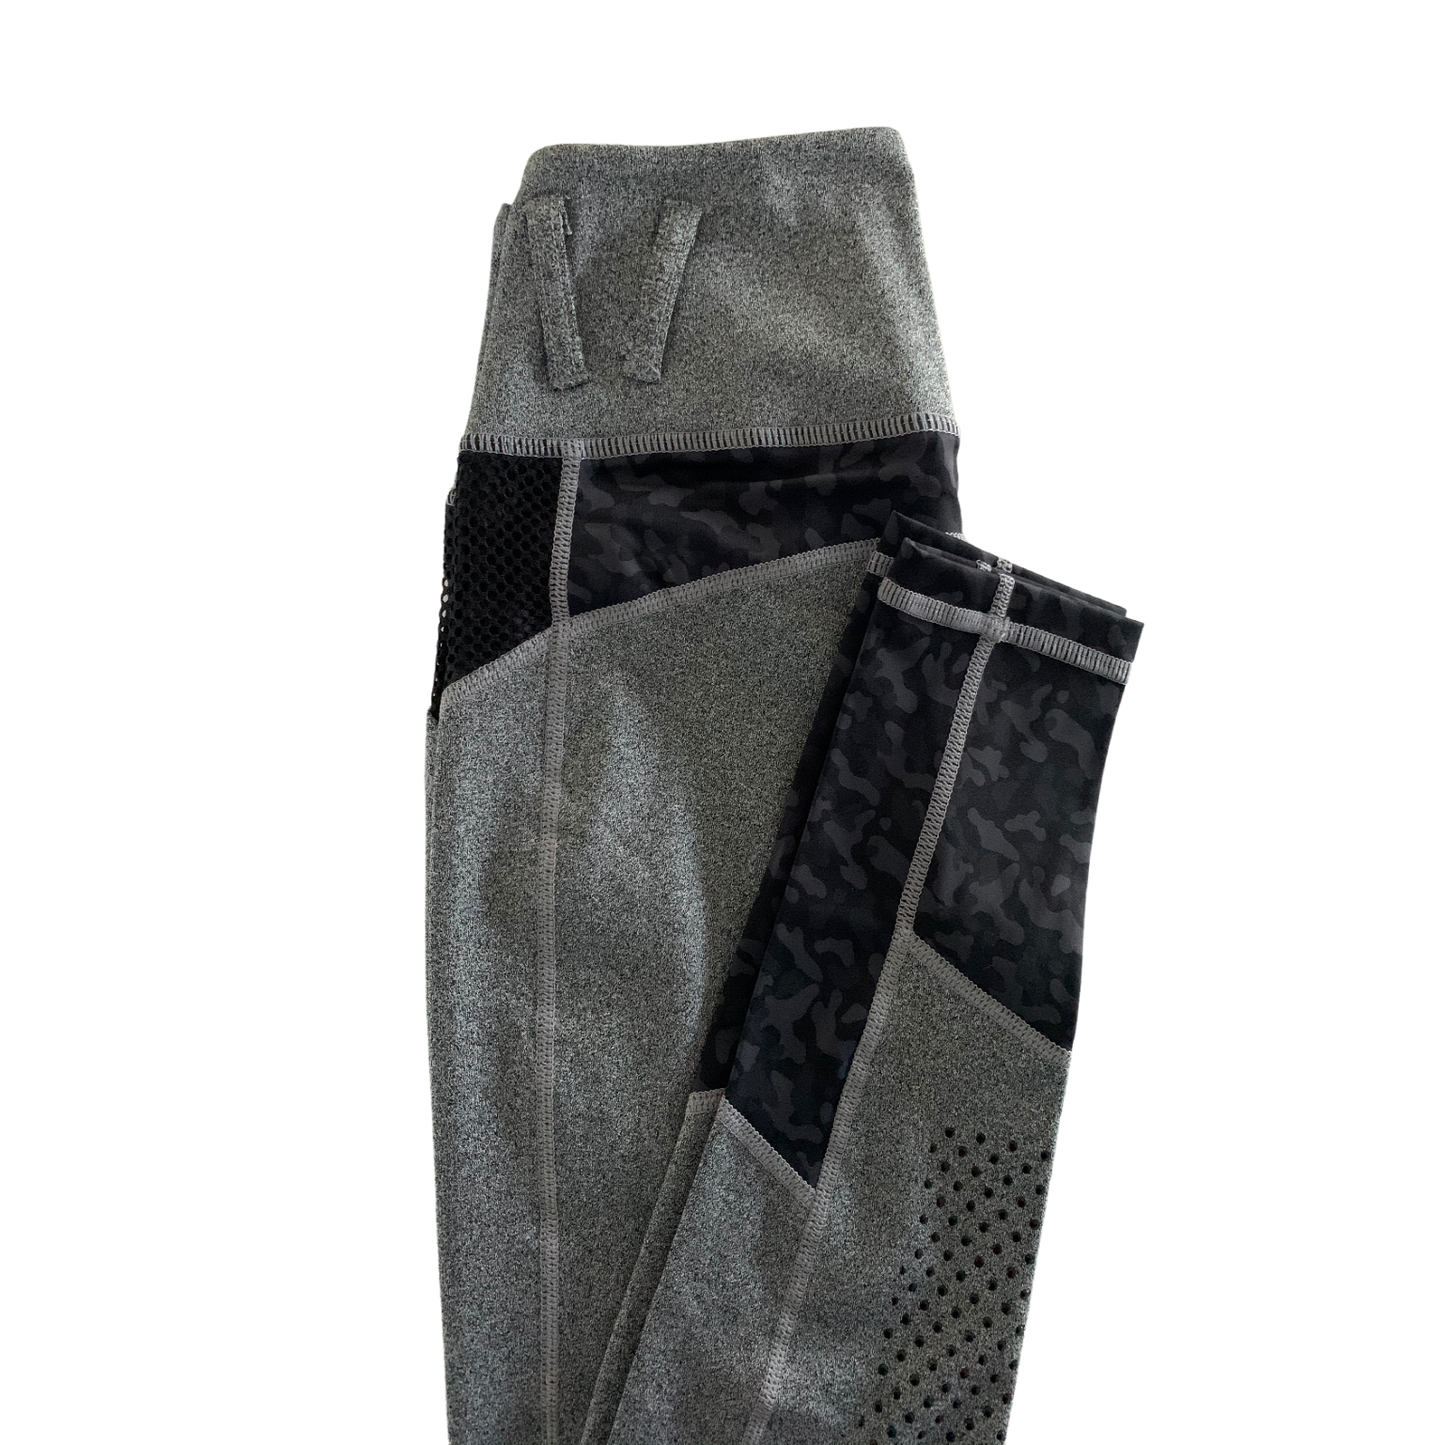 Grey and black camo horse riding tights with mesh panels.